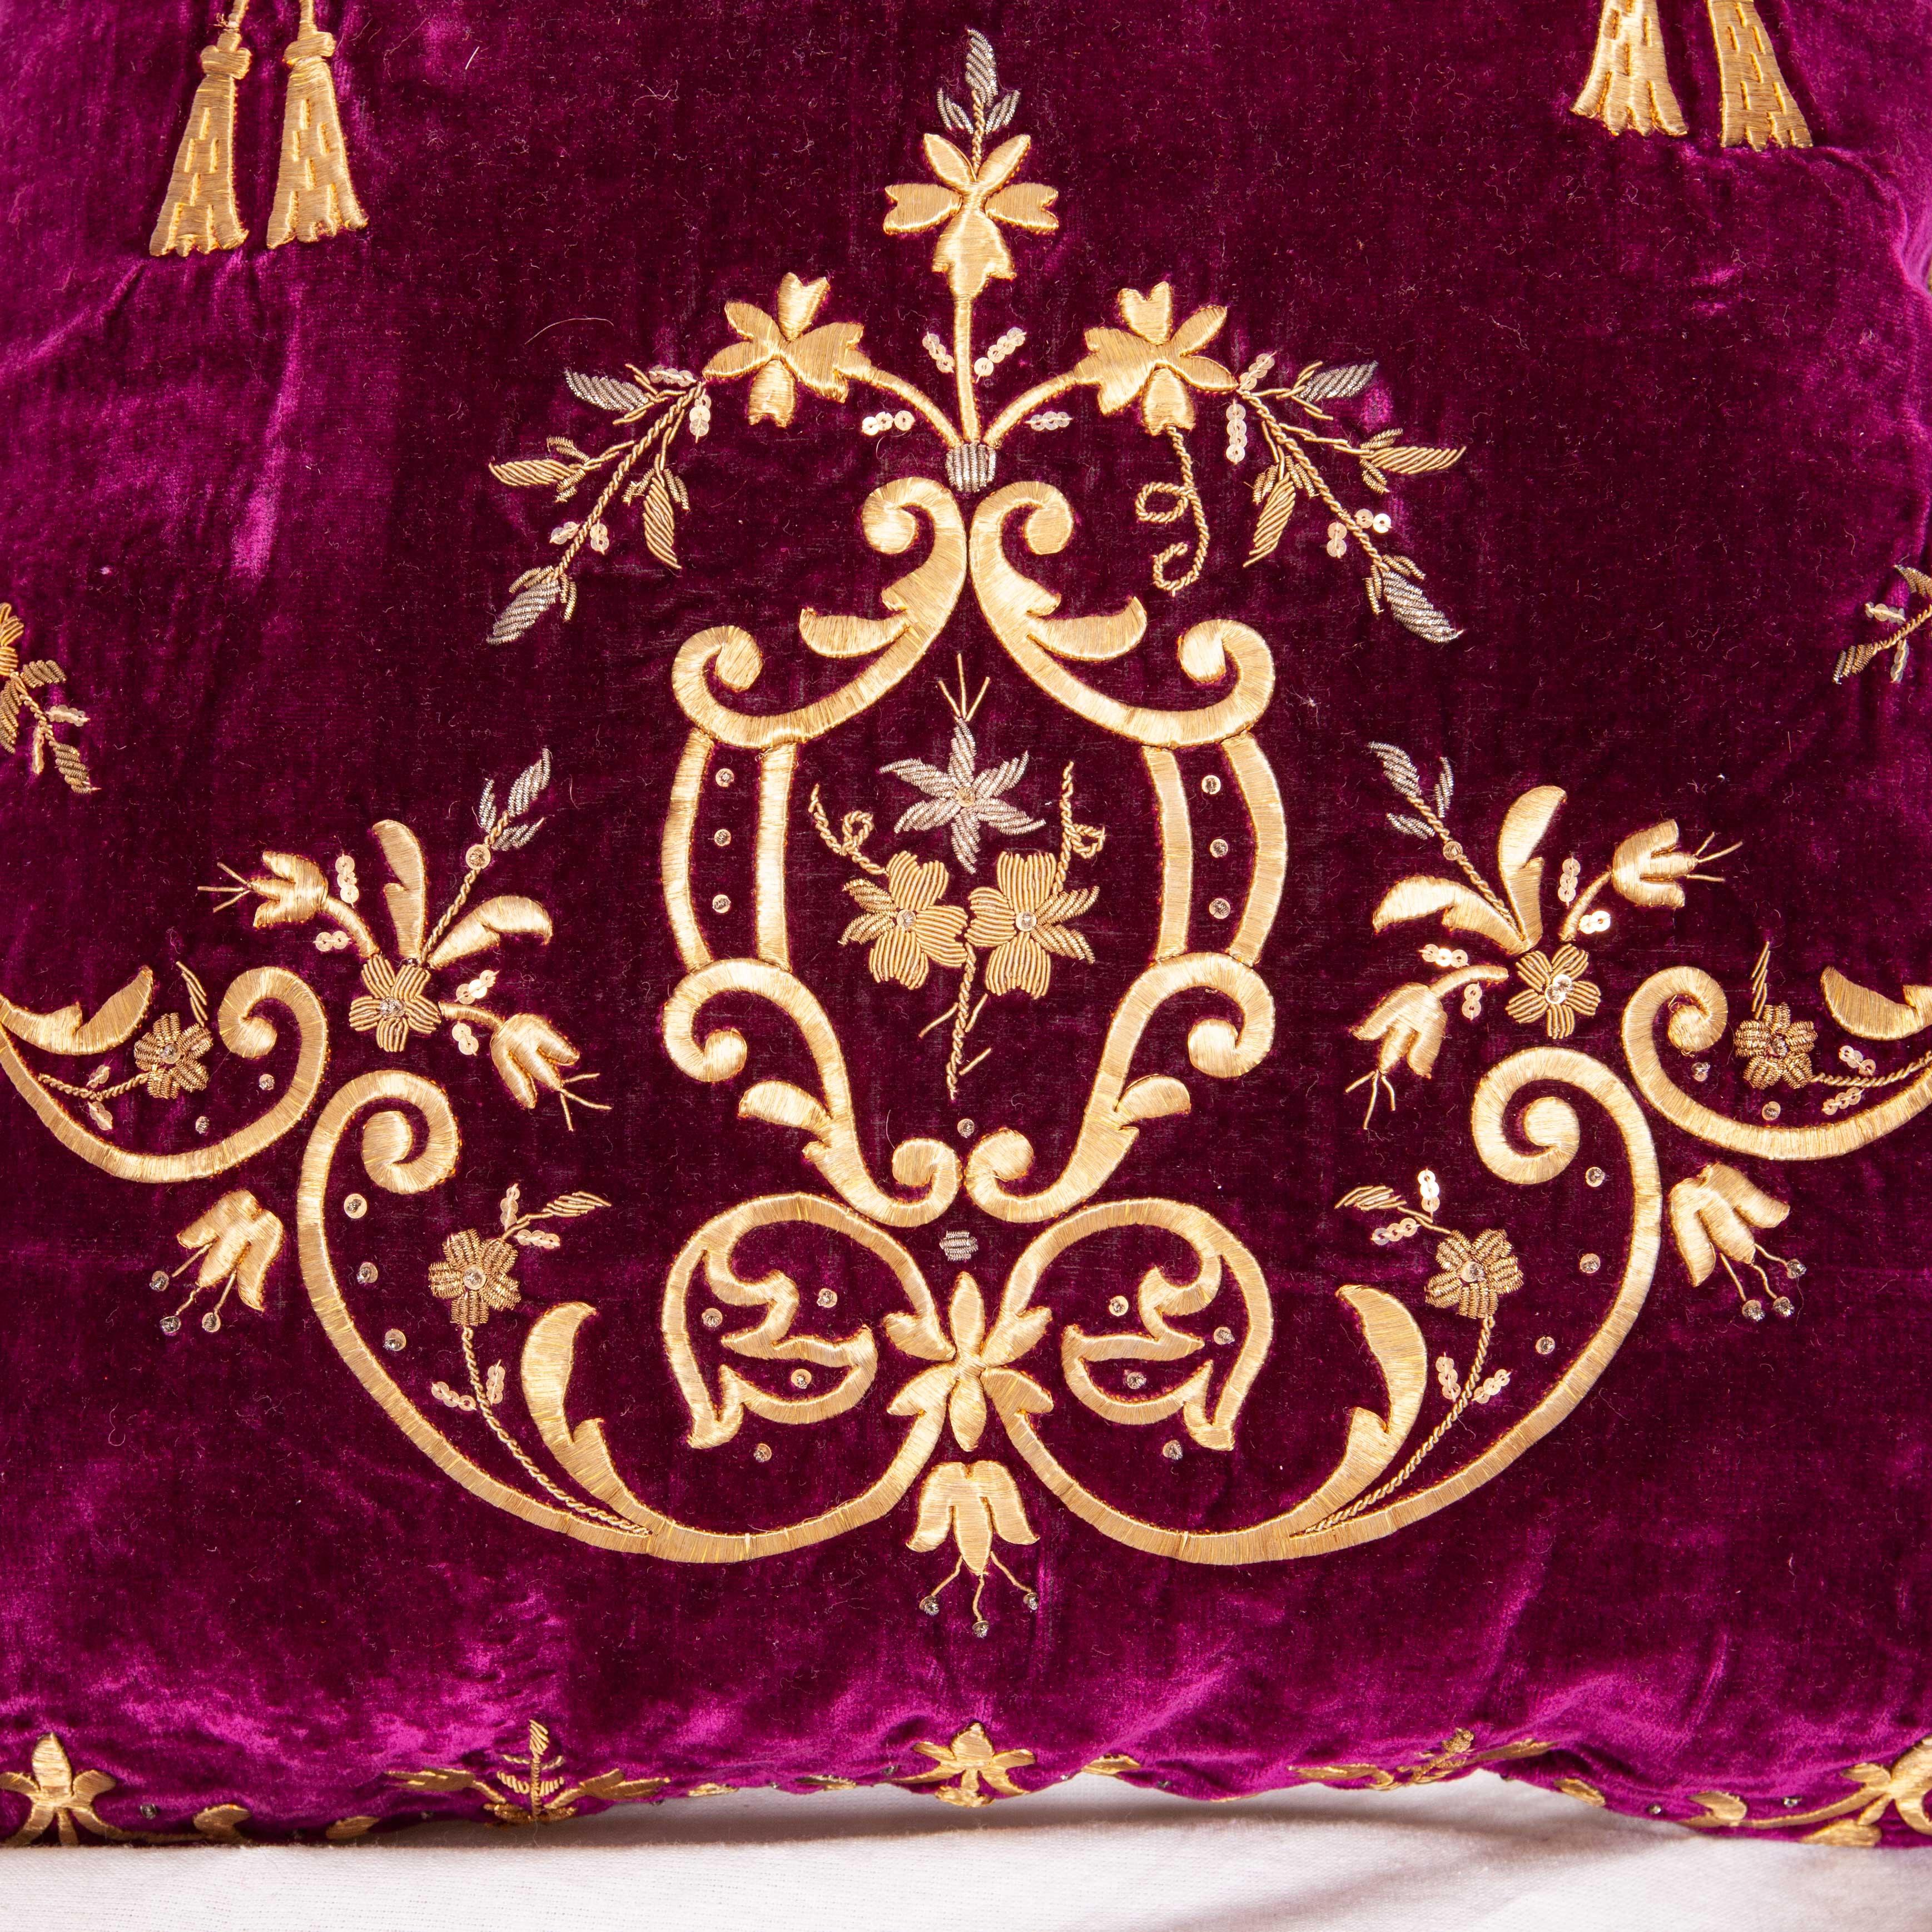 Embroidered Antique Pillow case / Cushion Cover Fashioned from Ottoman Embroidery